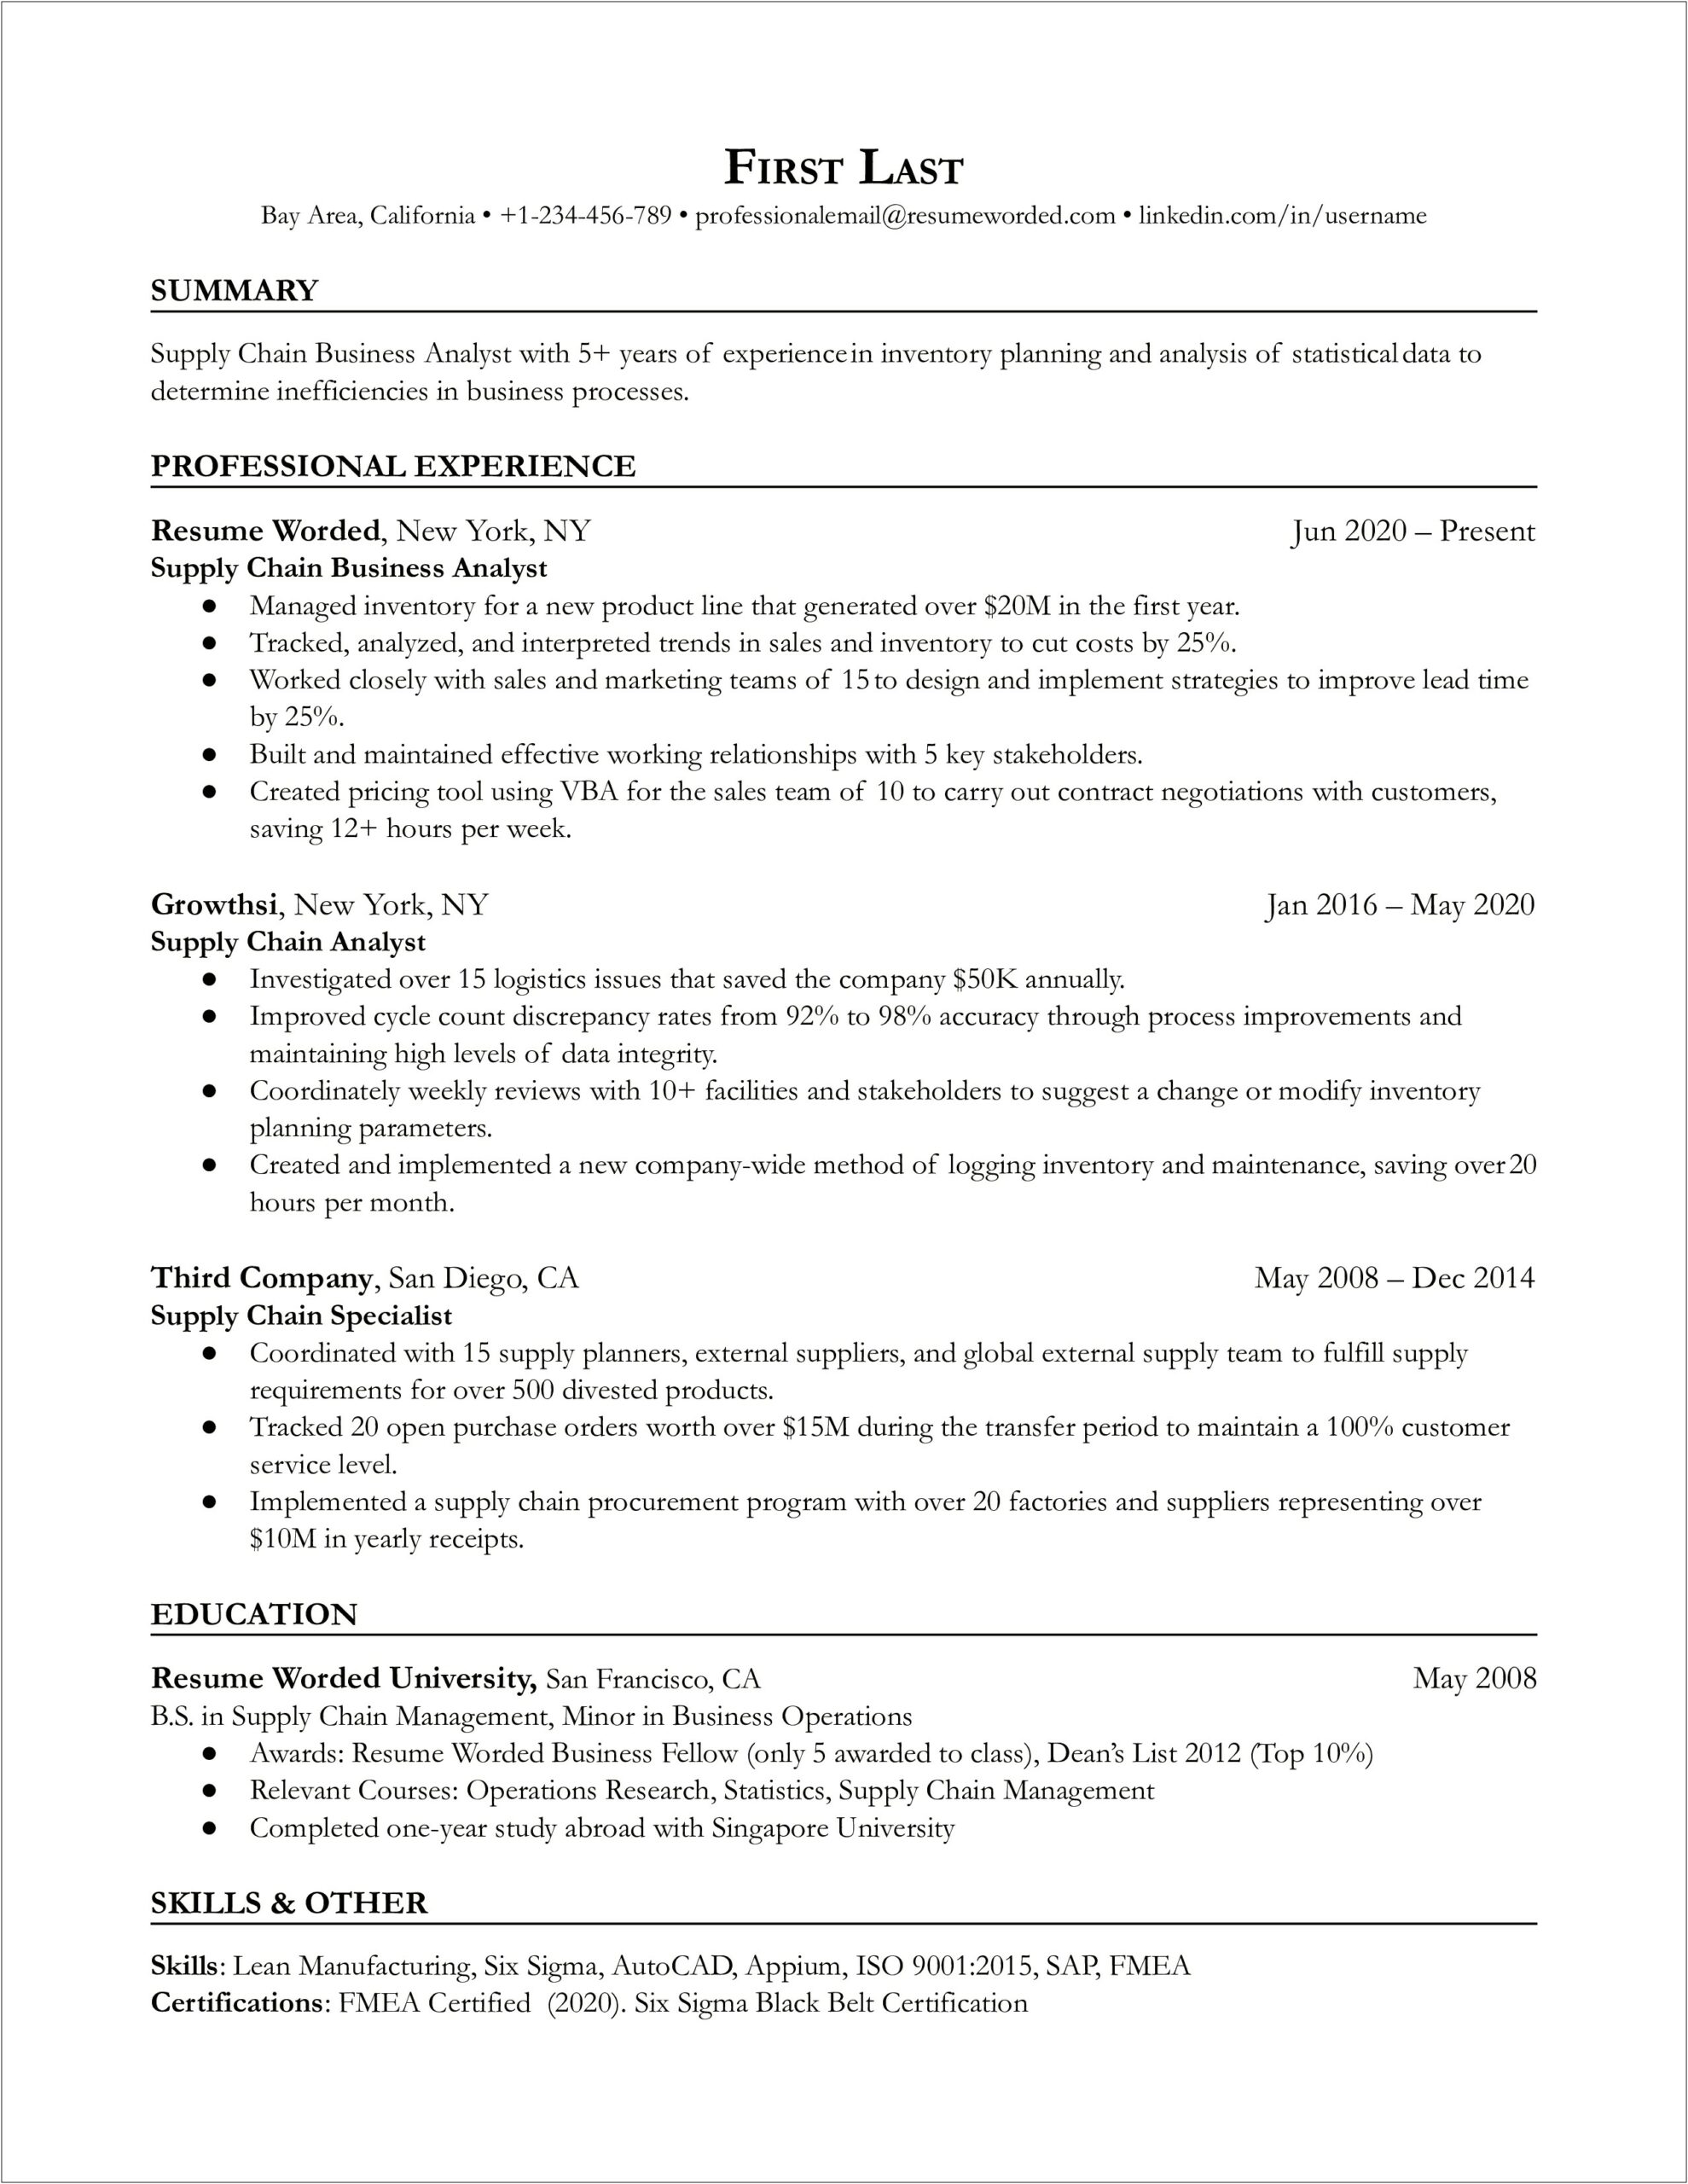 Supply Chain Management Resume On A Business